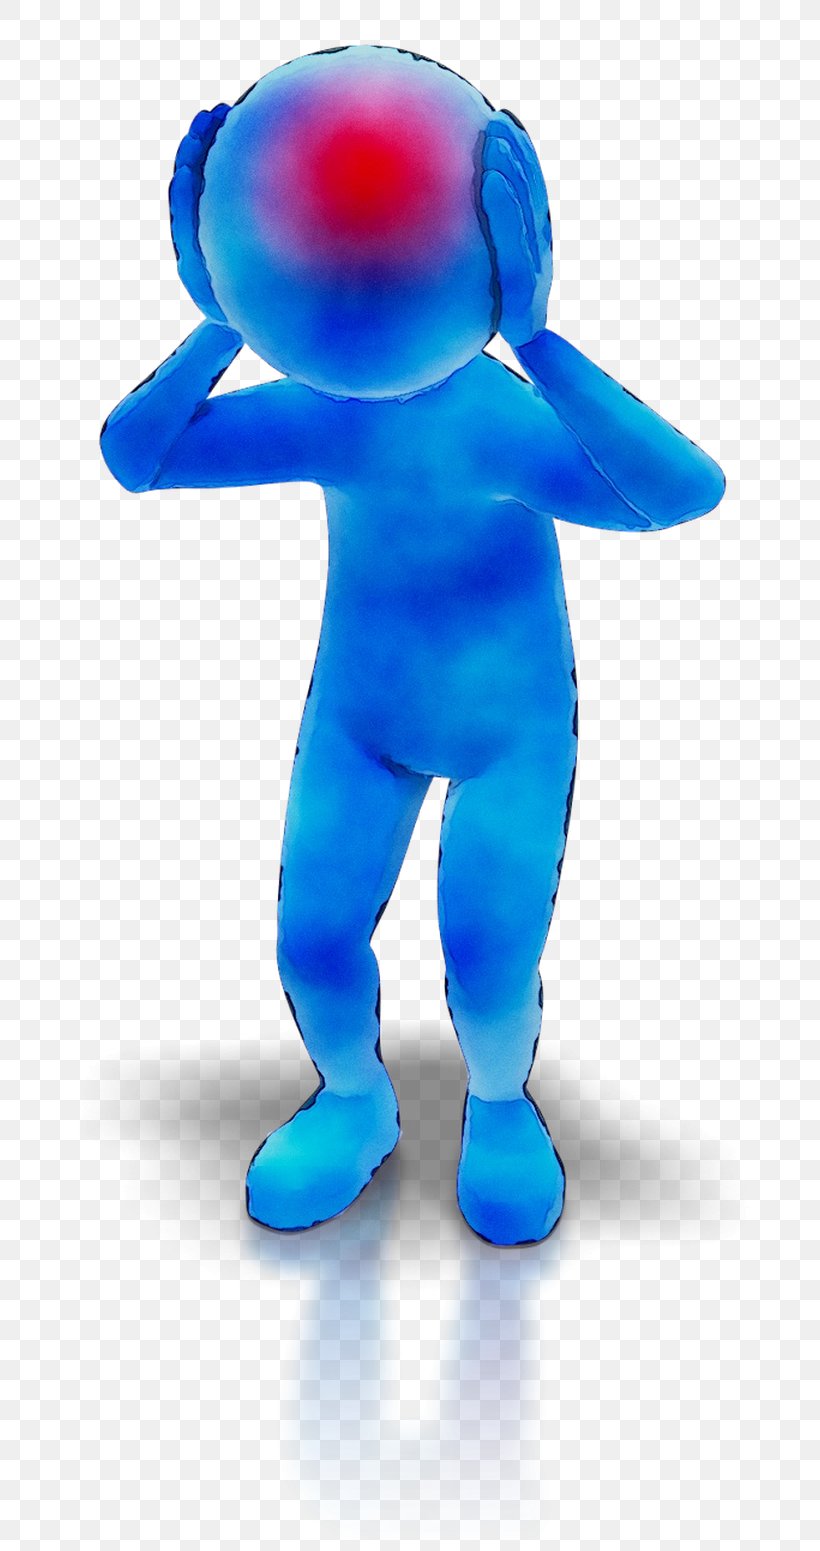 Organism Mascot Figurine, PNG, 708x1551px, Organism, Animation, Blue, Electric Blue, Fictional Character Download Free